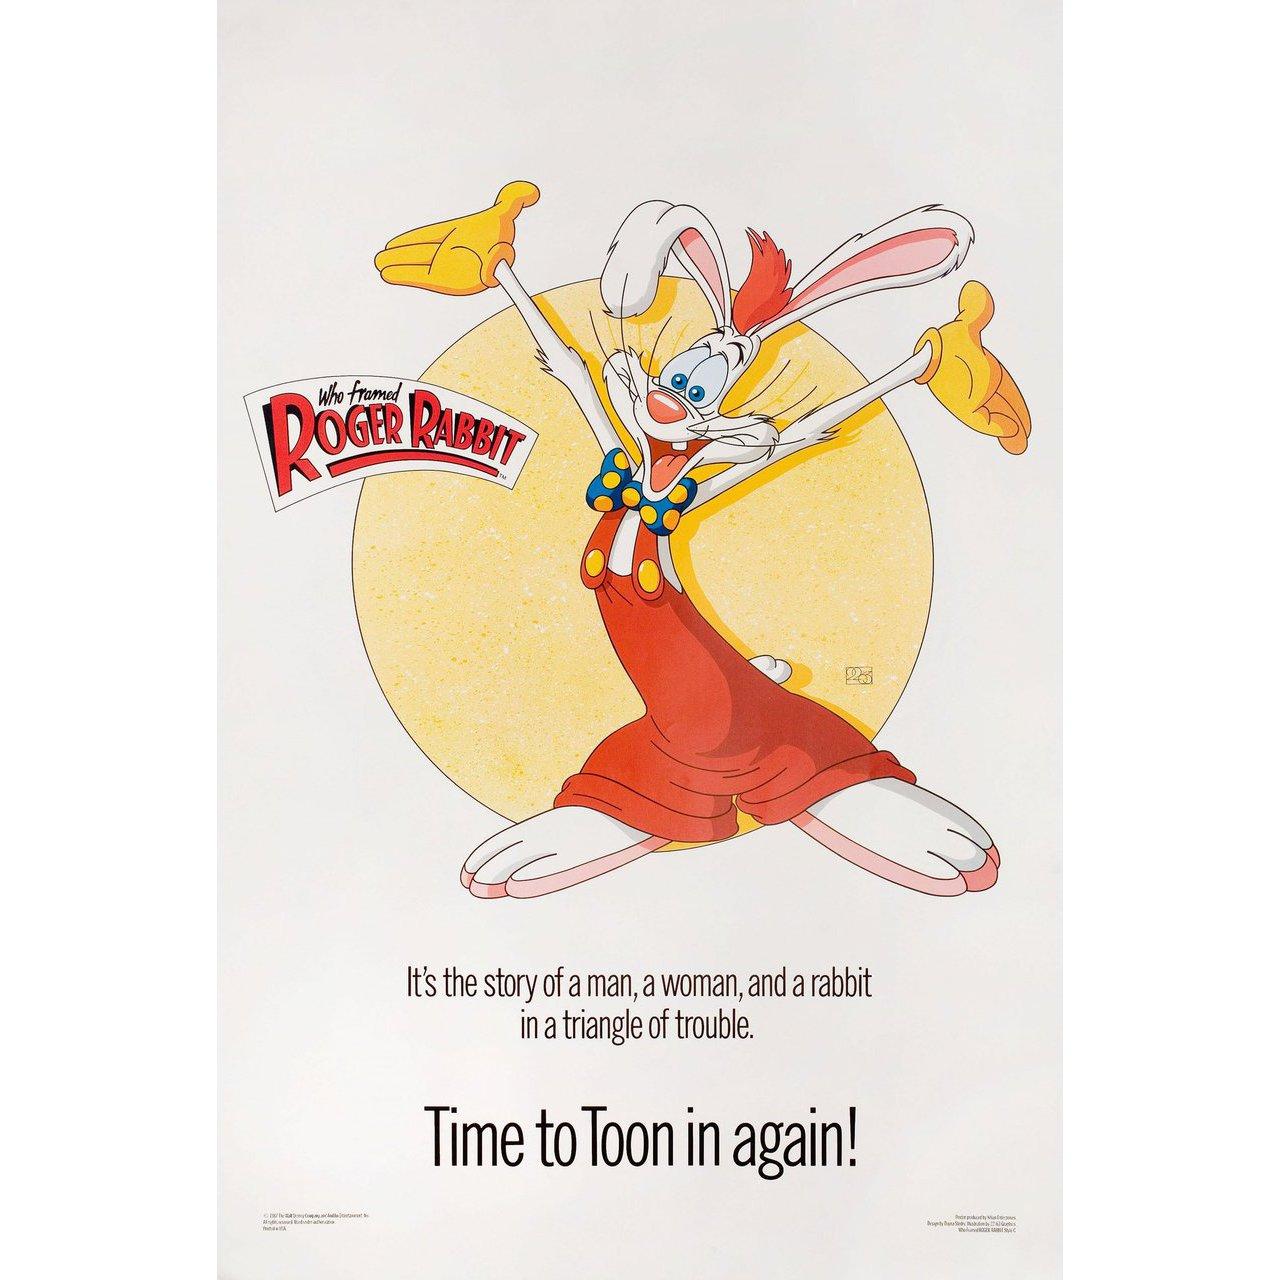 Original 1988 U.S. one sheet poster by Dayna Stedry for the film “Who Framed Roger Rabbit” directed by Robert Zemeckis with Bob Hoskins / Christopher Lloyd / Joanna Cassidy / Charles Fleischer. Very good-fine condition, rolled. Please note: the size